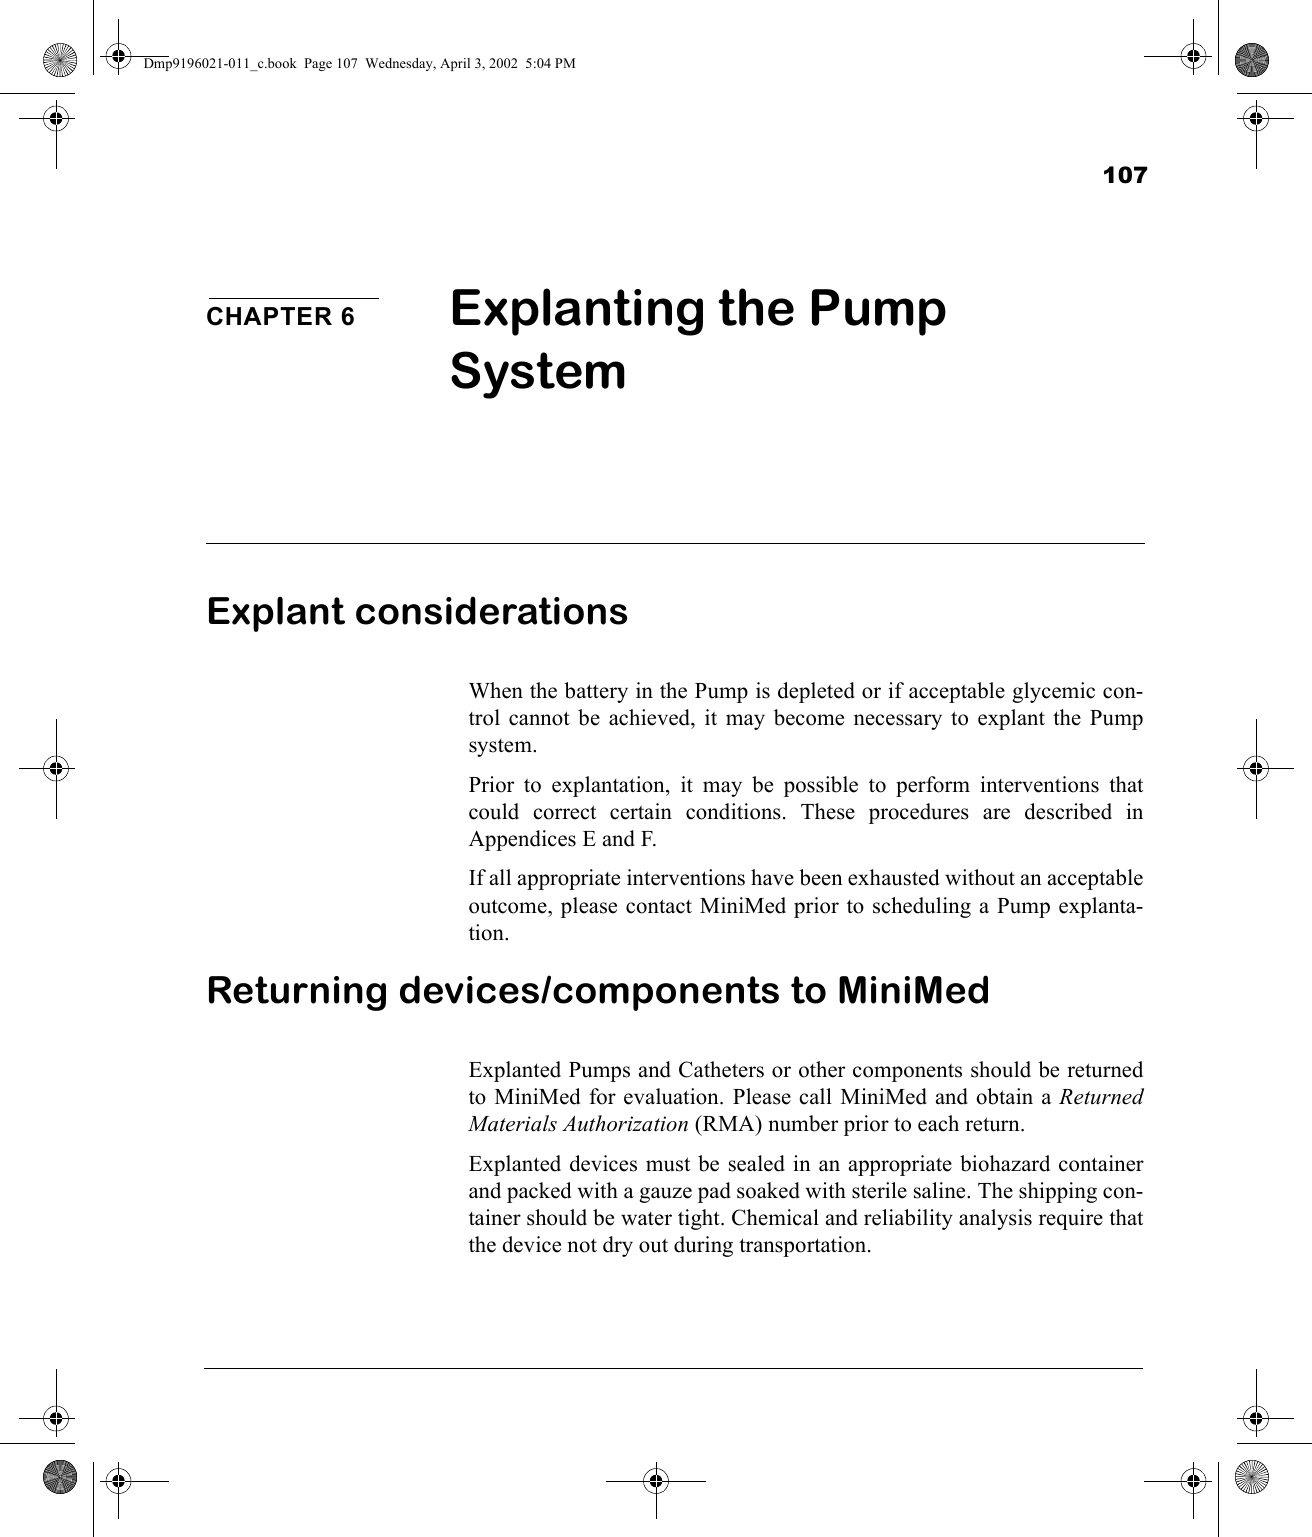 107CHAPTER 6 Explanting the Pump System Explant considerationsWhen the battery in the Pump is depleted or if acceptable glycemic con-trol cannot be achieved, it may become necessary to explant the Pumpsystem.Prior to explantation, it may be possible to perform interventions thatcould correct certain conditions. These procedures are described inAppendices E and F. If all appropriate interventions have been exhausted without an acceptableoutcome, please contact MiniMed prior to scheduling a Pump explanta-tion.Returning devices/components to MiniMedExplanted Pumps and Catheters or other components should be returnedto MiniMed for evaluation. Please call MiniMed and obtain a ReturnedMaterials Authorization (RMA) number prior to each return.Explanted devices must be sealed in an appropriate biohazard containerand packed with a gauze pad soaked with sterile saline. The shipping con-tainer should be water tight. Chemical and reliability analysis require thatthe device not dry out during transportation. Dmp9196021-011_c.book  Page 107  Wednesday, April 3, 2002  5:04 PM